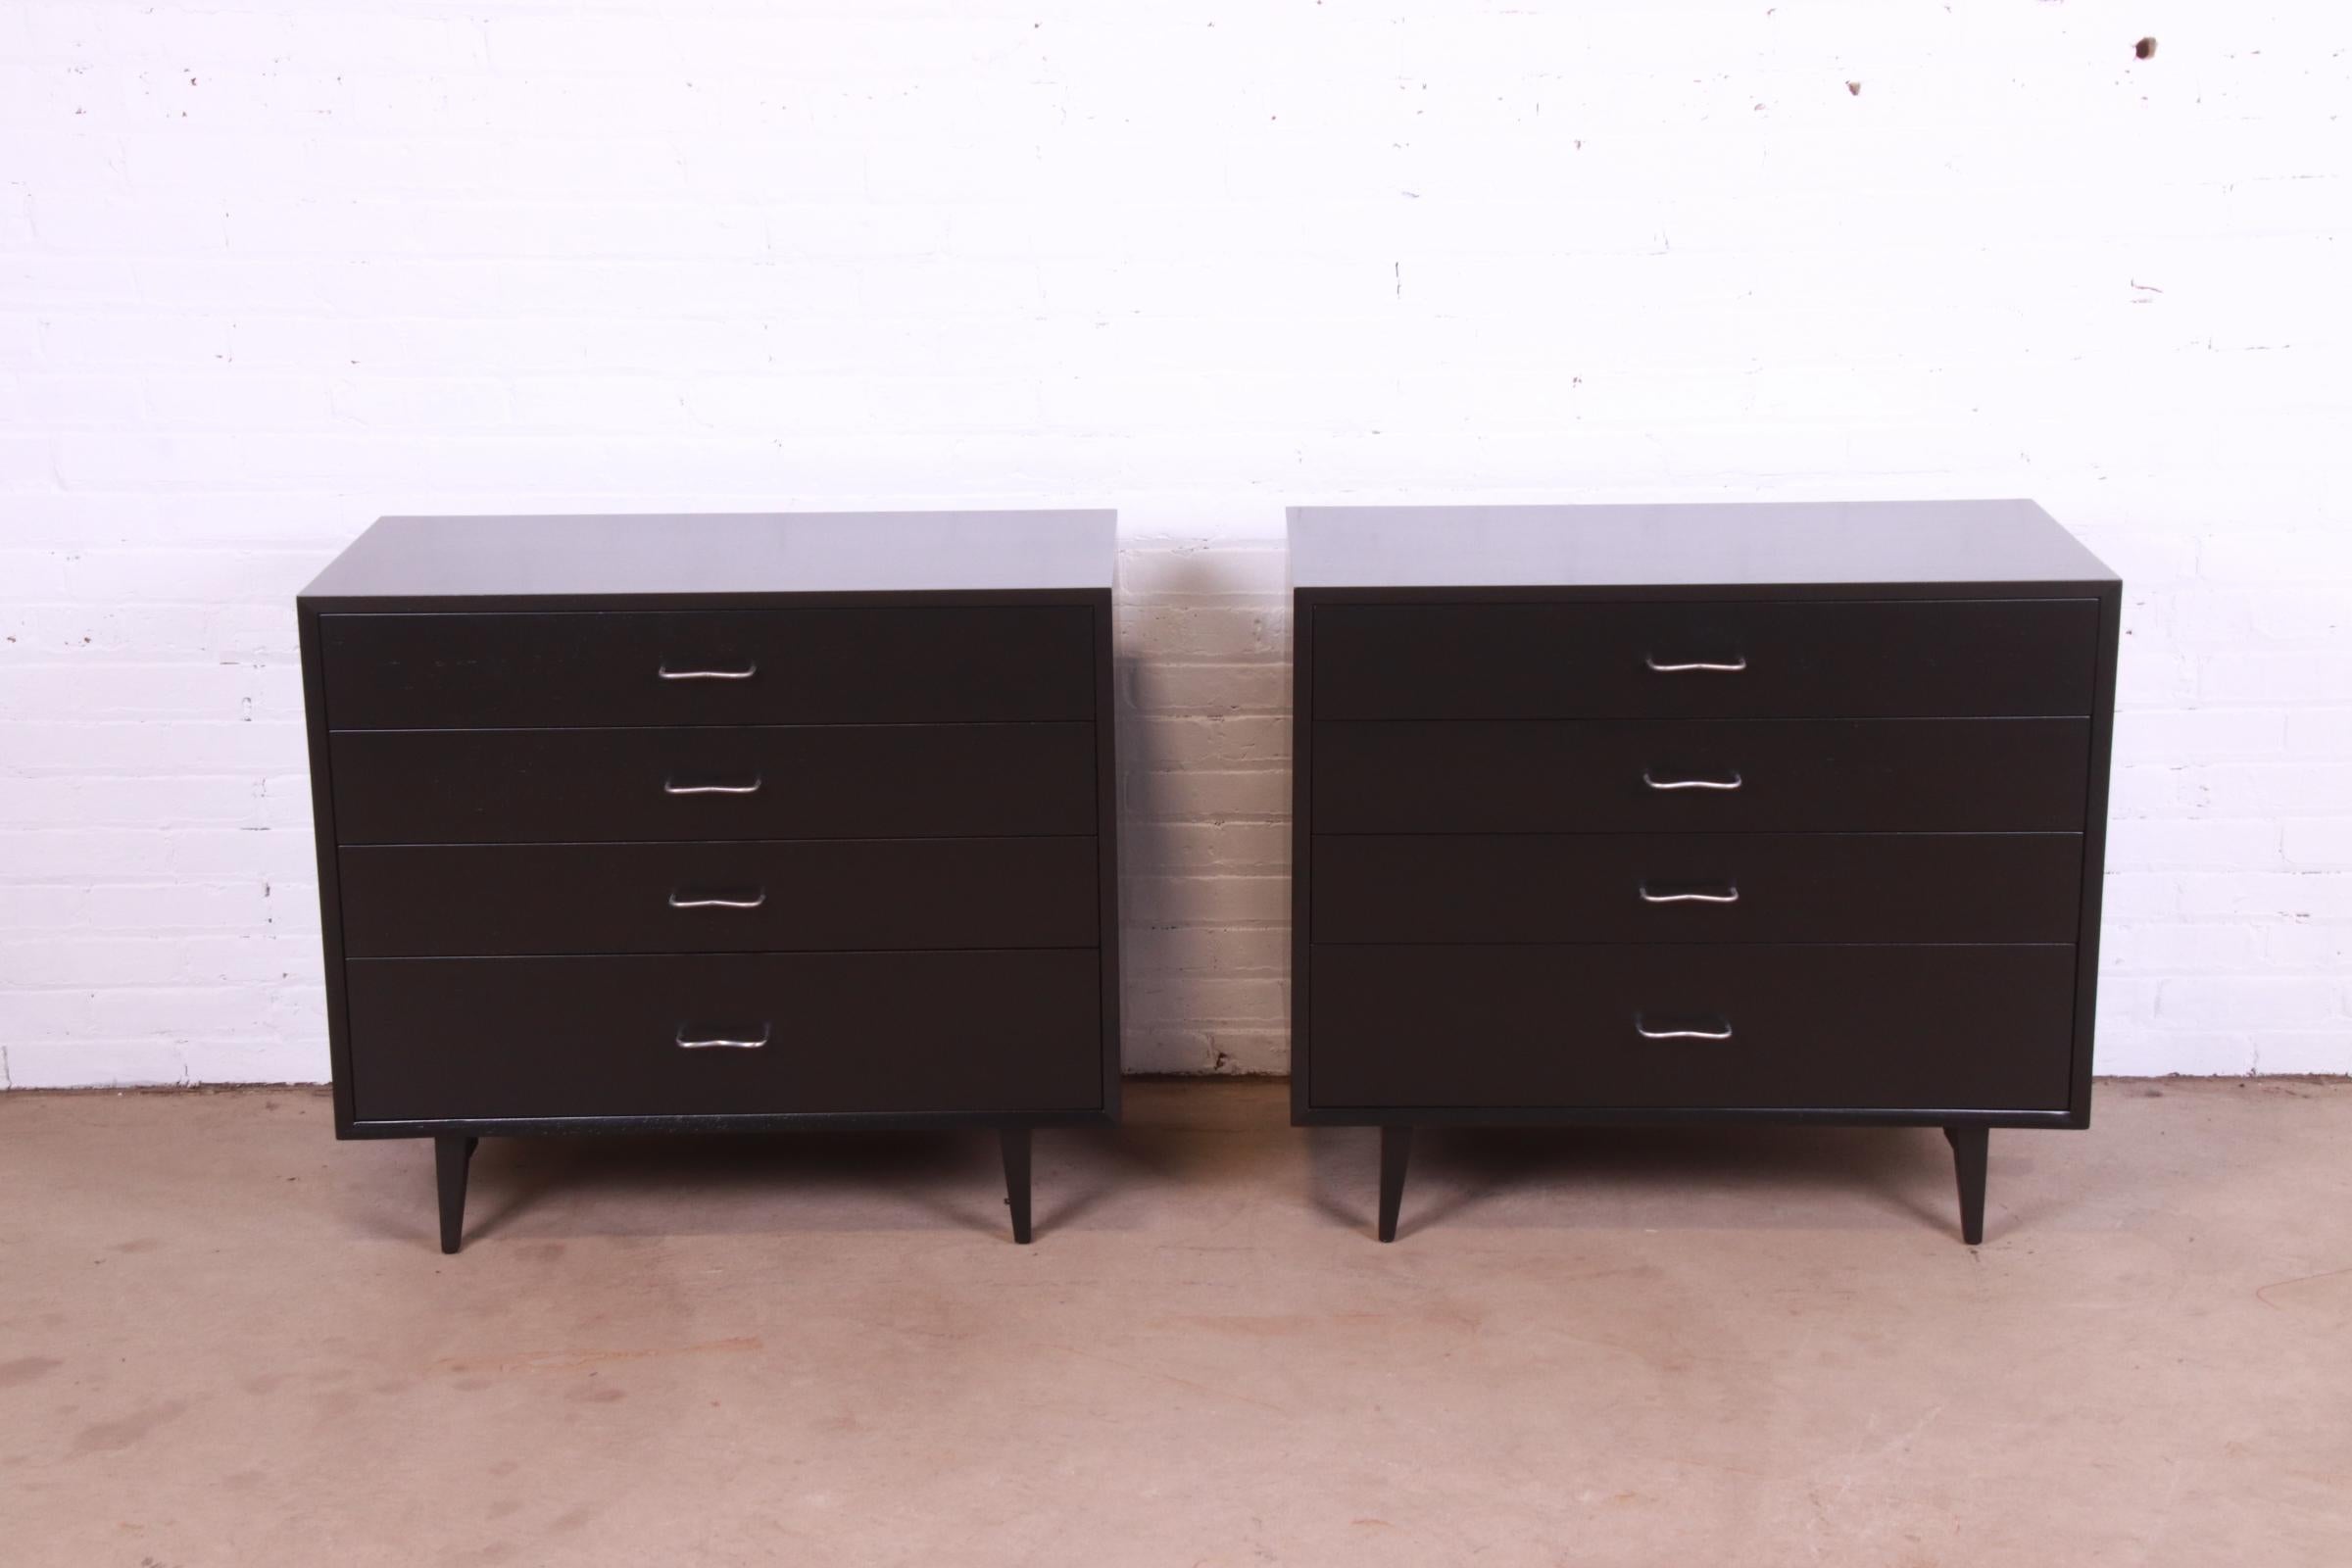 An exceptional pair of Mid-Century Modern four-drawer dressers, chests of drawers, or large bedside chests

By George Nelson for Herman Miller, 